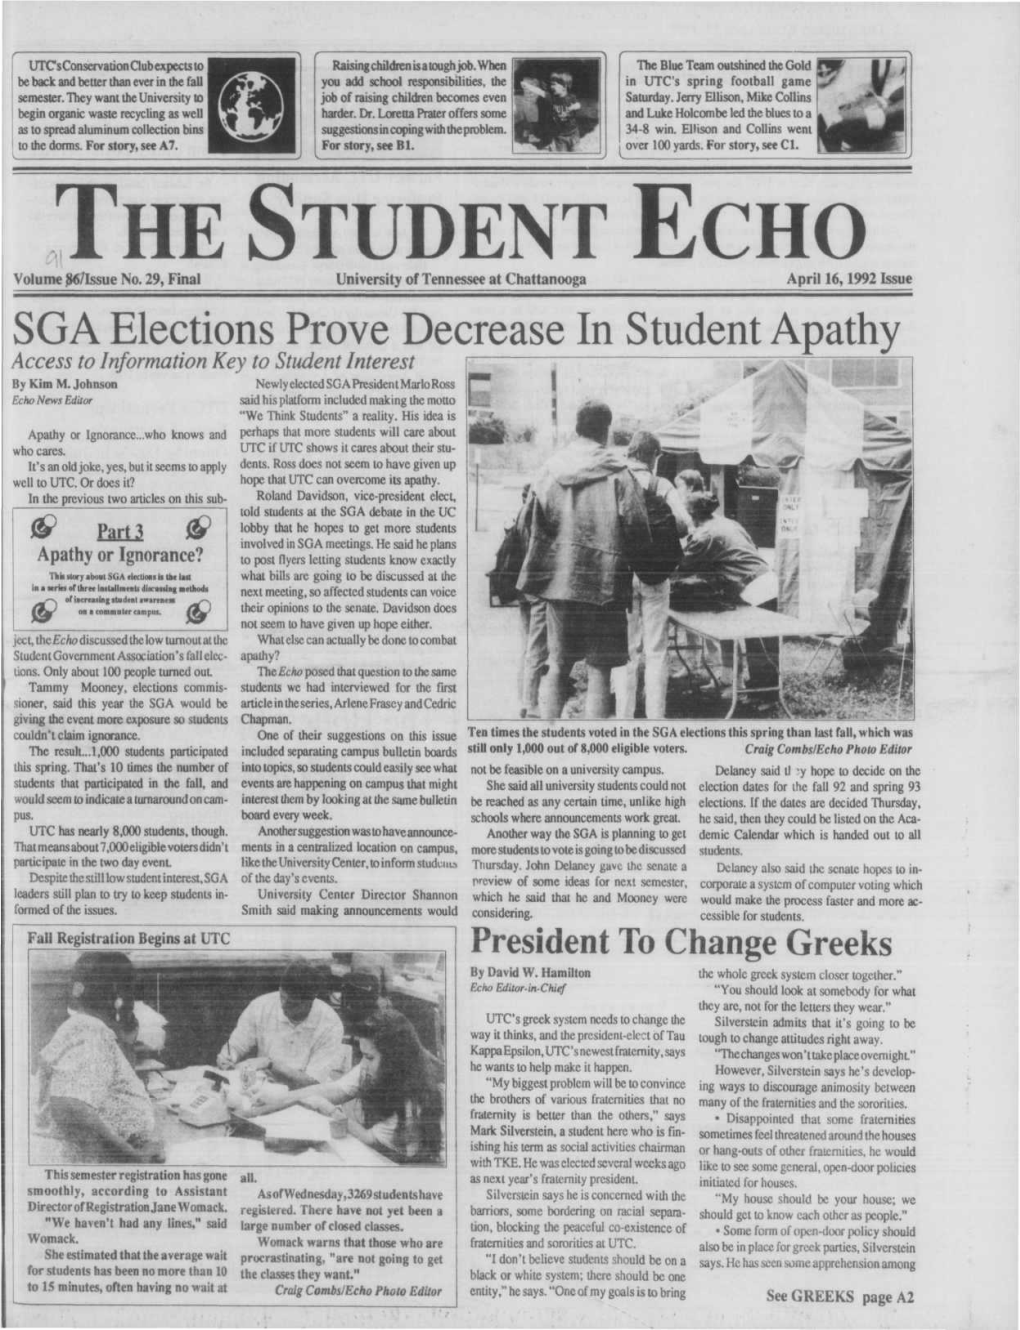 SGA Elections Prove Decrease in Student Apathy Access to Information Key to Student Interest by Kim M